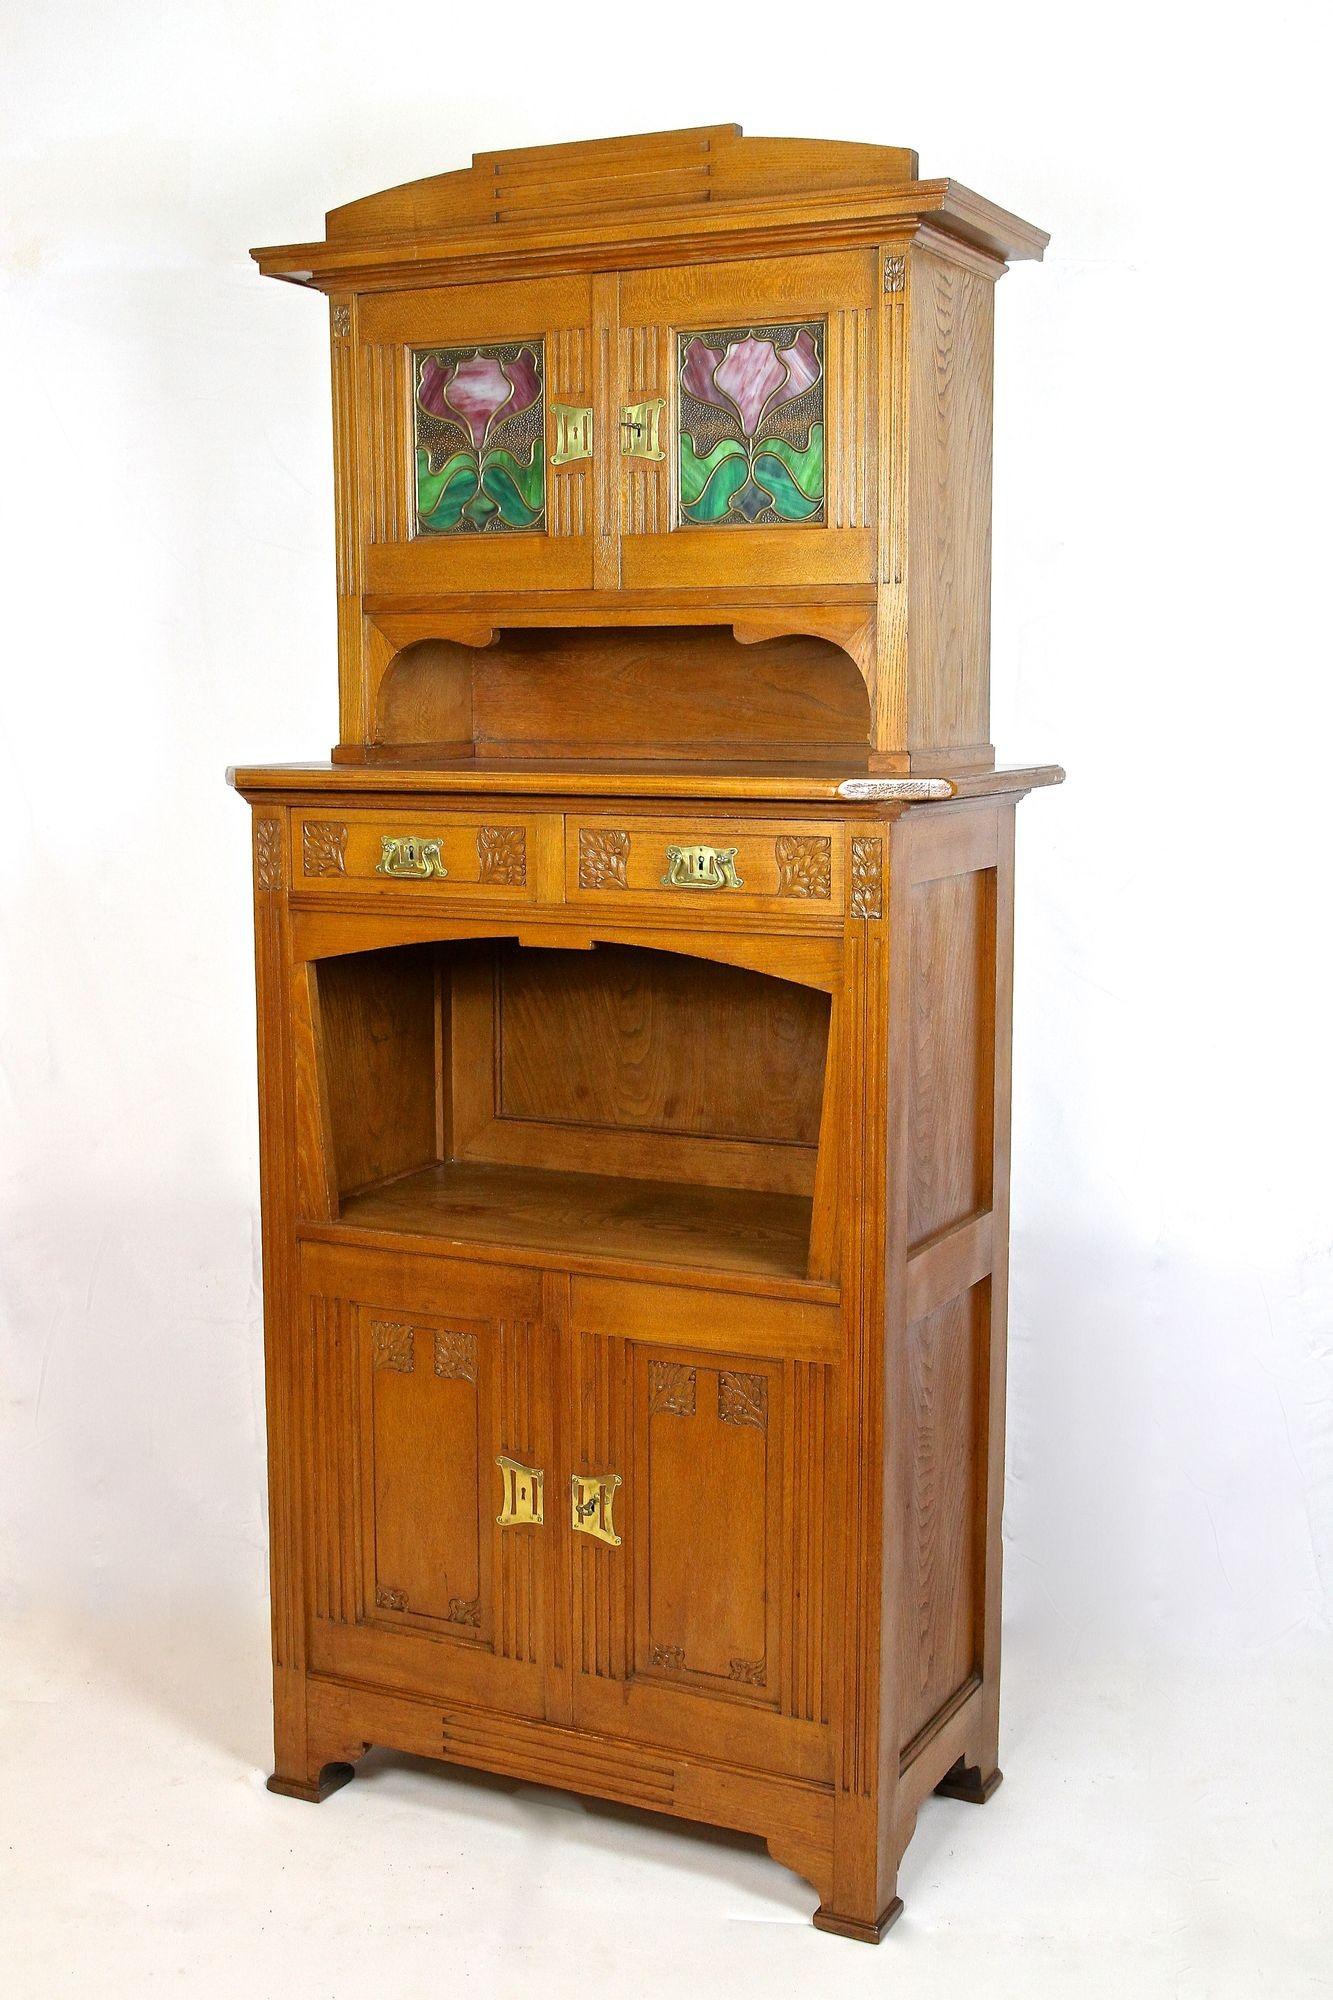 Brass Art Nouveau Oakwood Cabinet/ Buffet With Tiffany Style Glass Inlays, AT ca 1910 For Sale